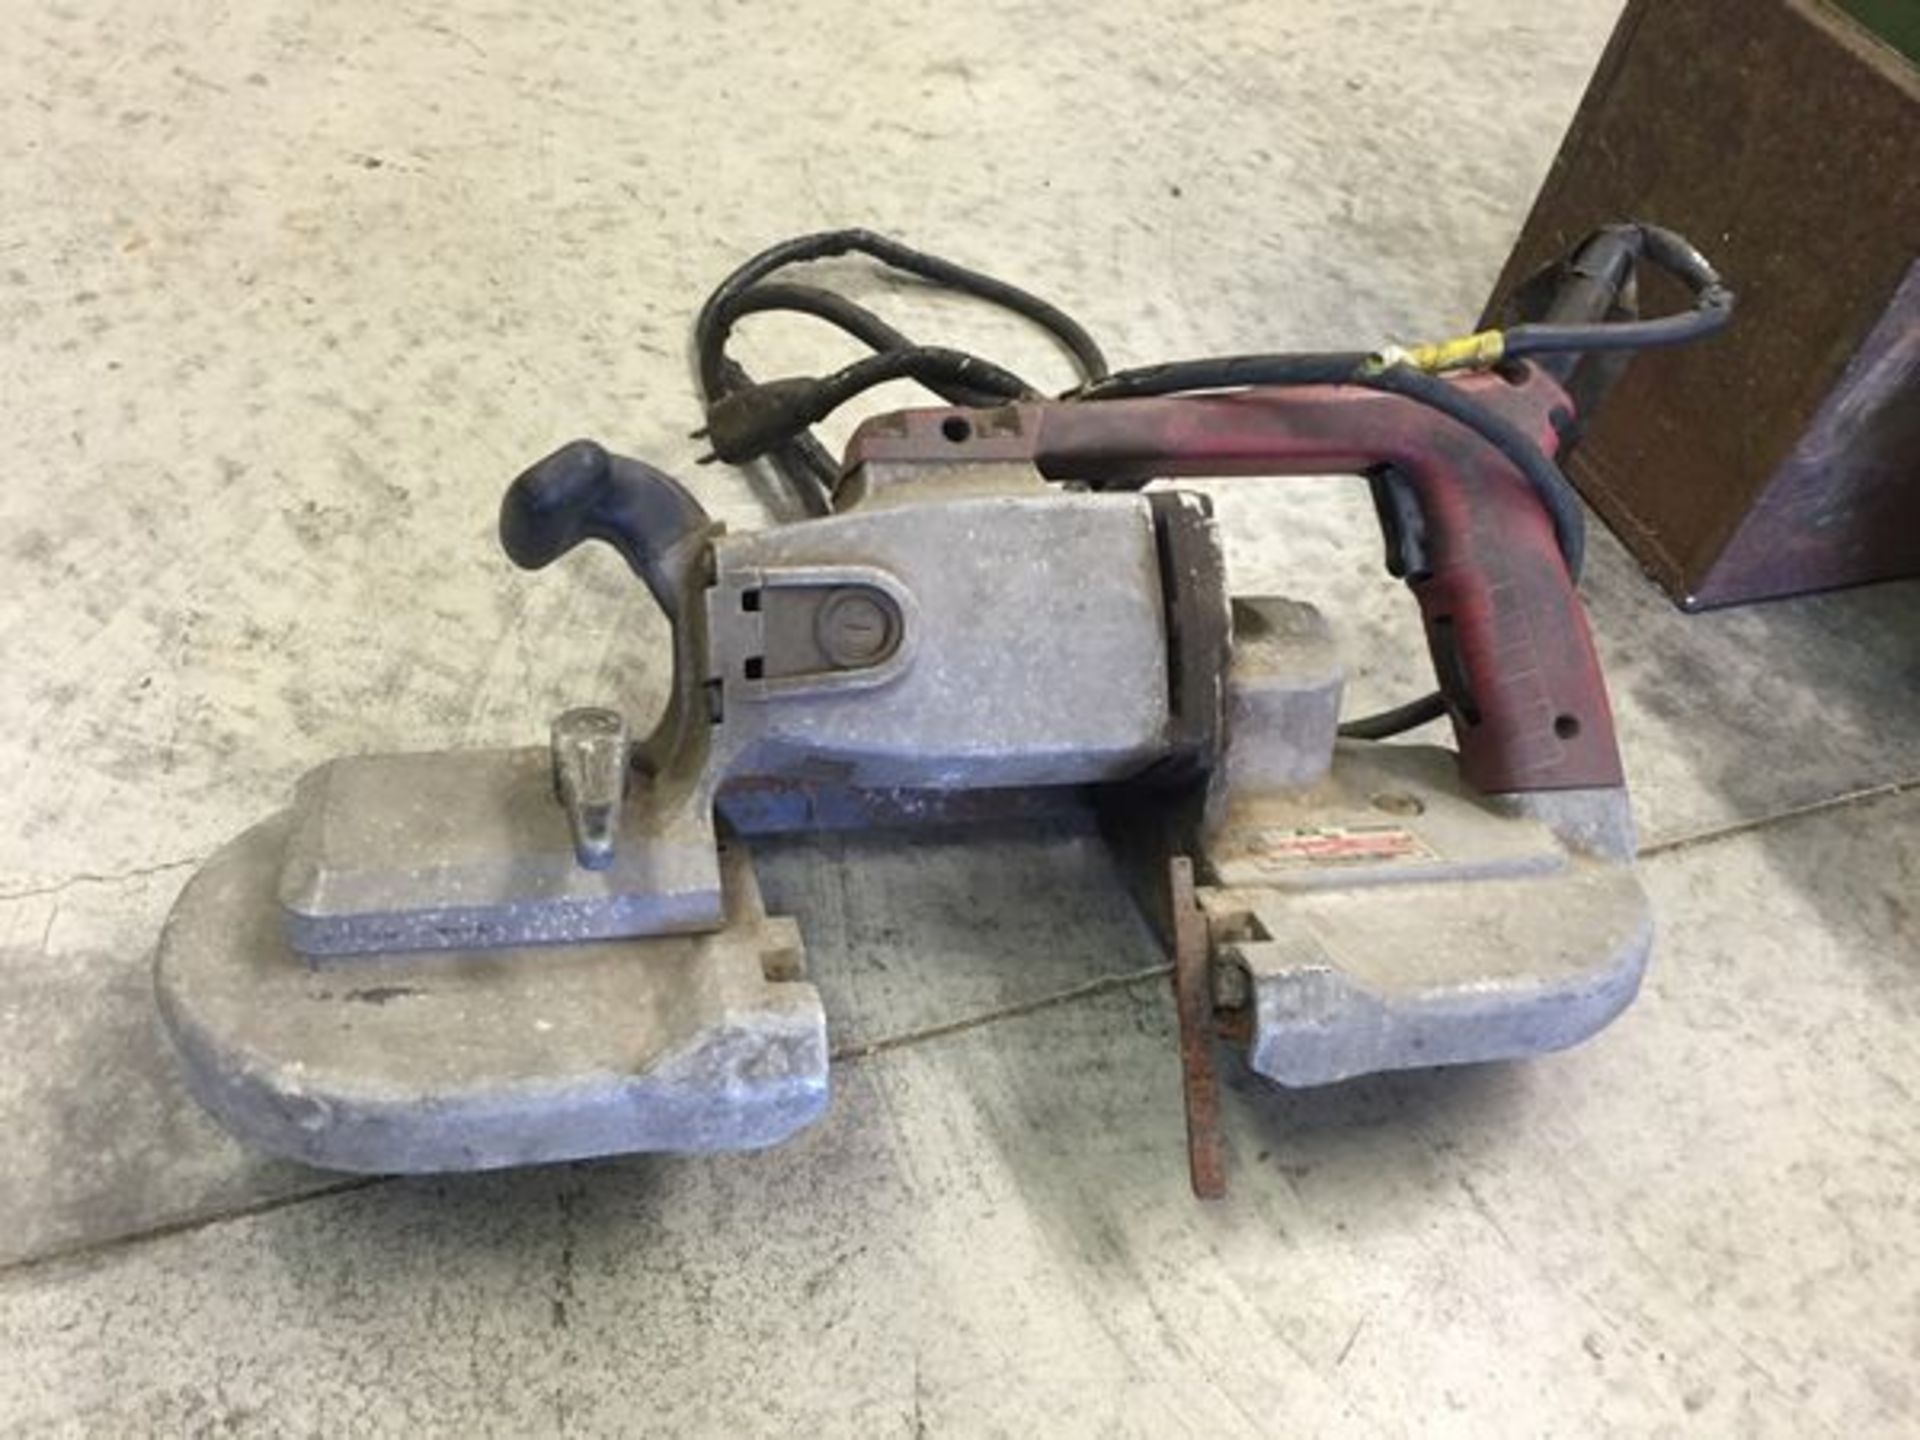 Lot of Tools Milwaukee Band Saw, Bender, Quick Saw, Jack - Image 2 of 5